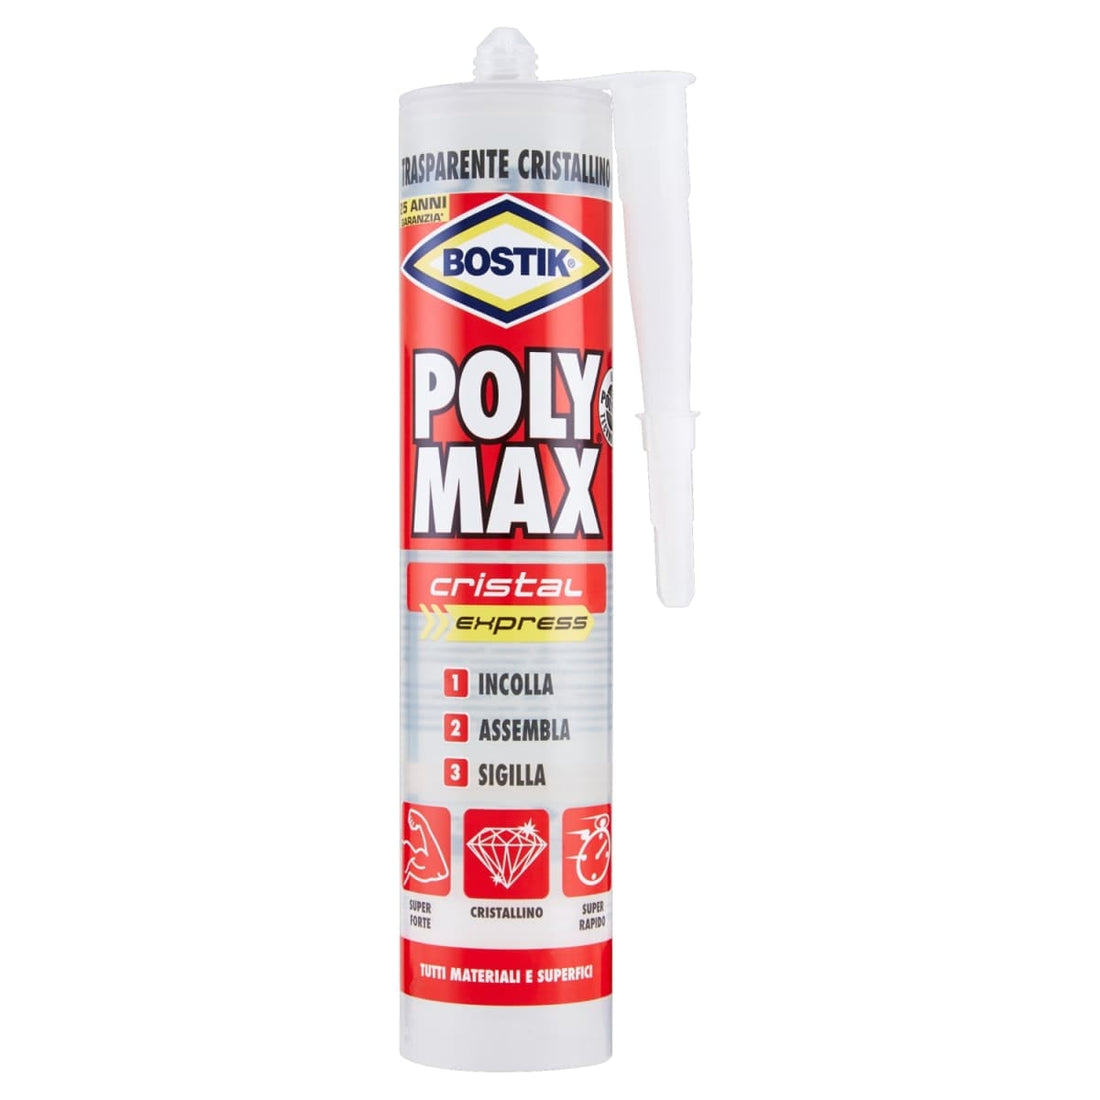 POLY MAX CRISTAL MOUNTING GLUE 300 G CARTRIDGE - best price from Maltashopper.com BR470671006